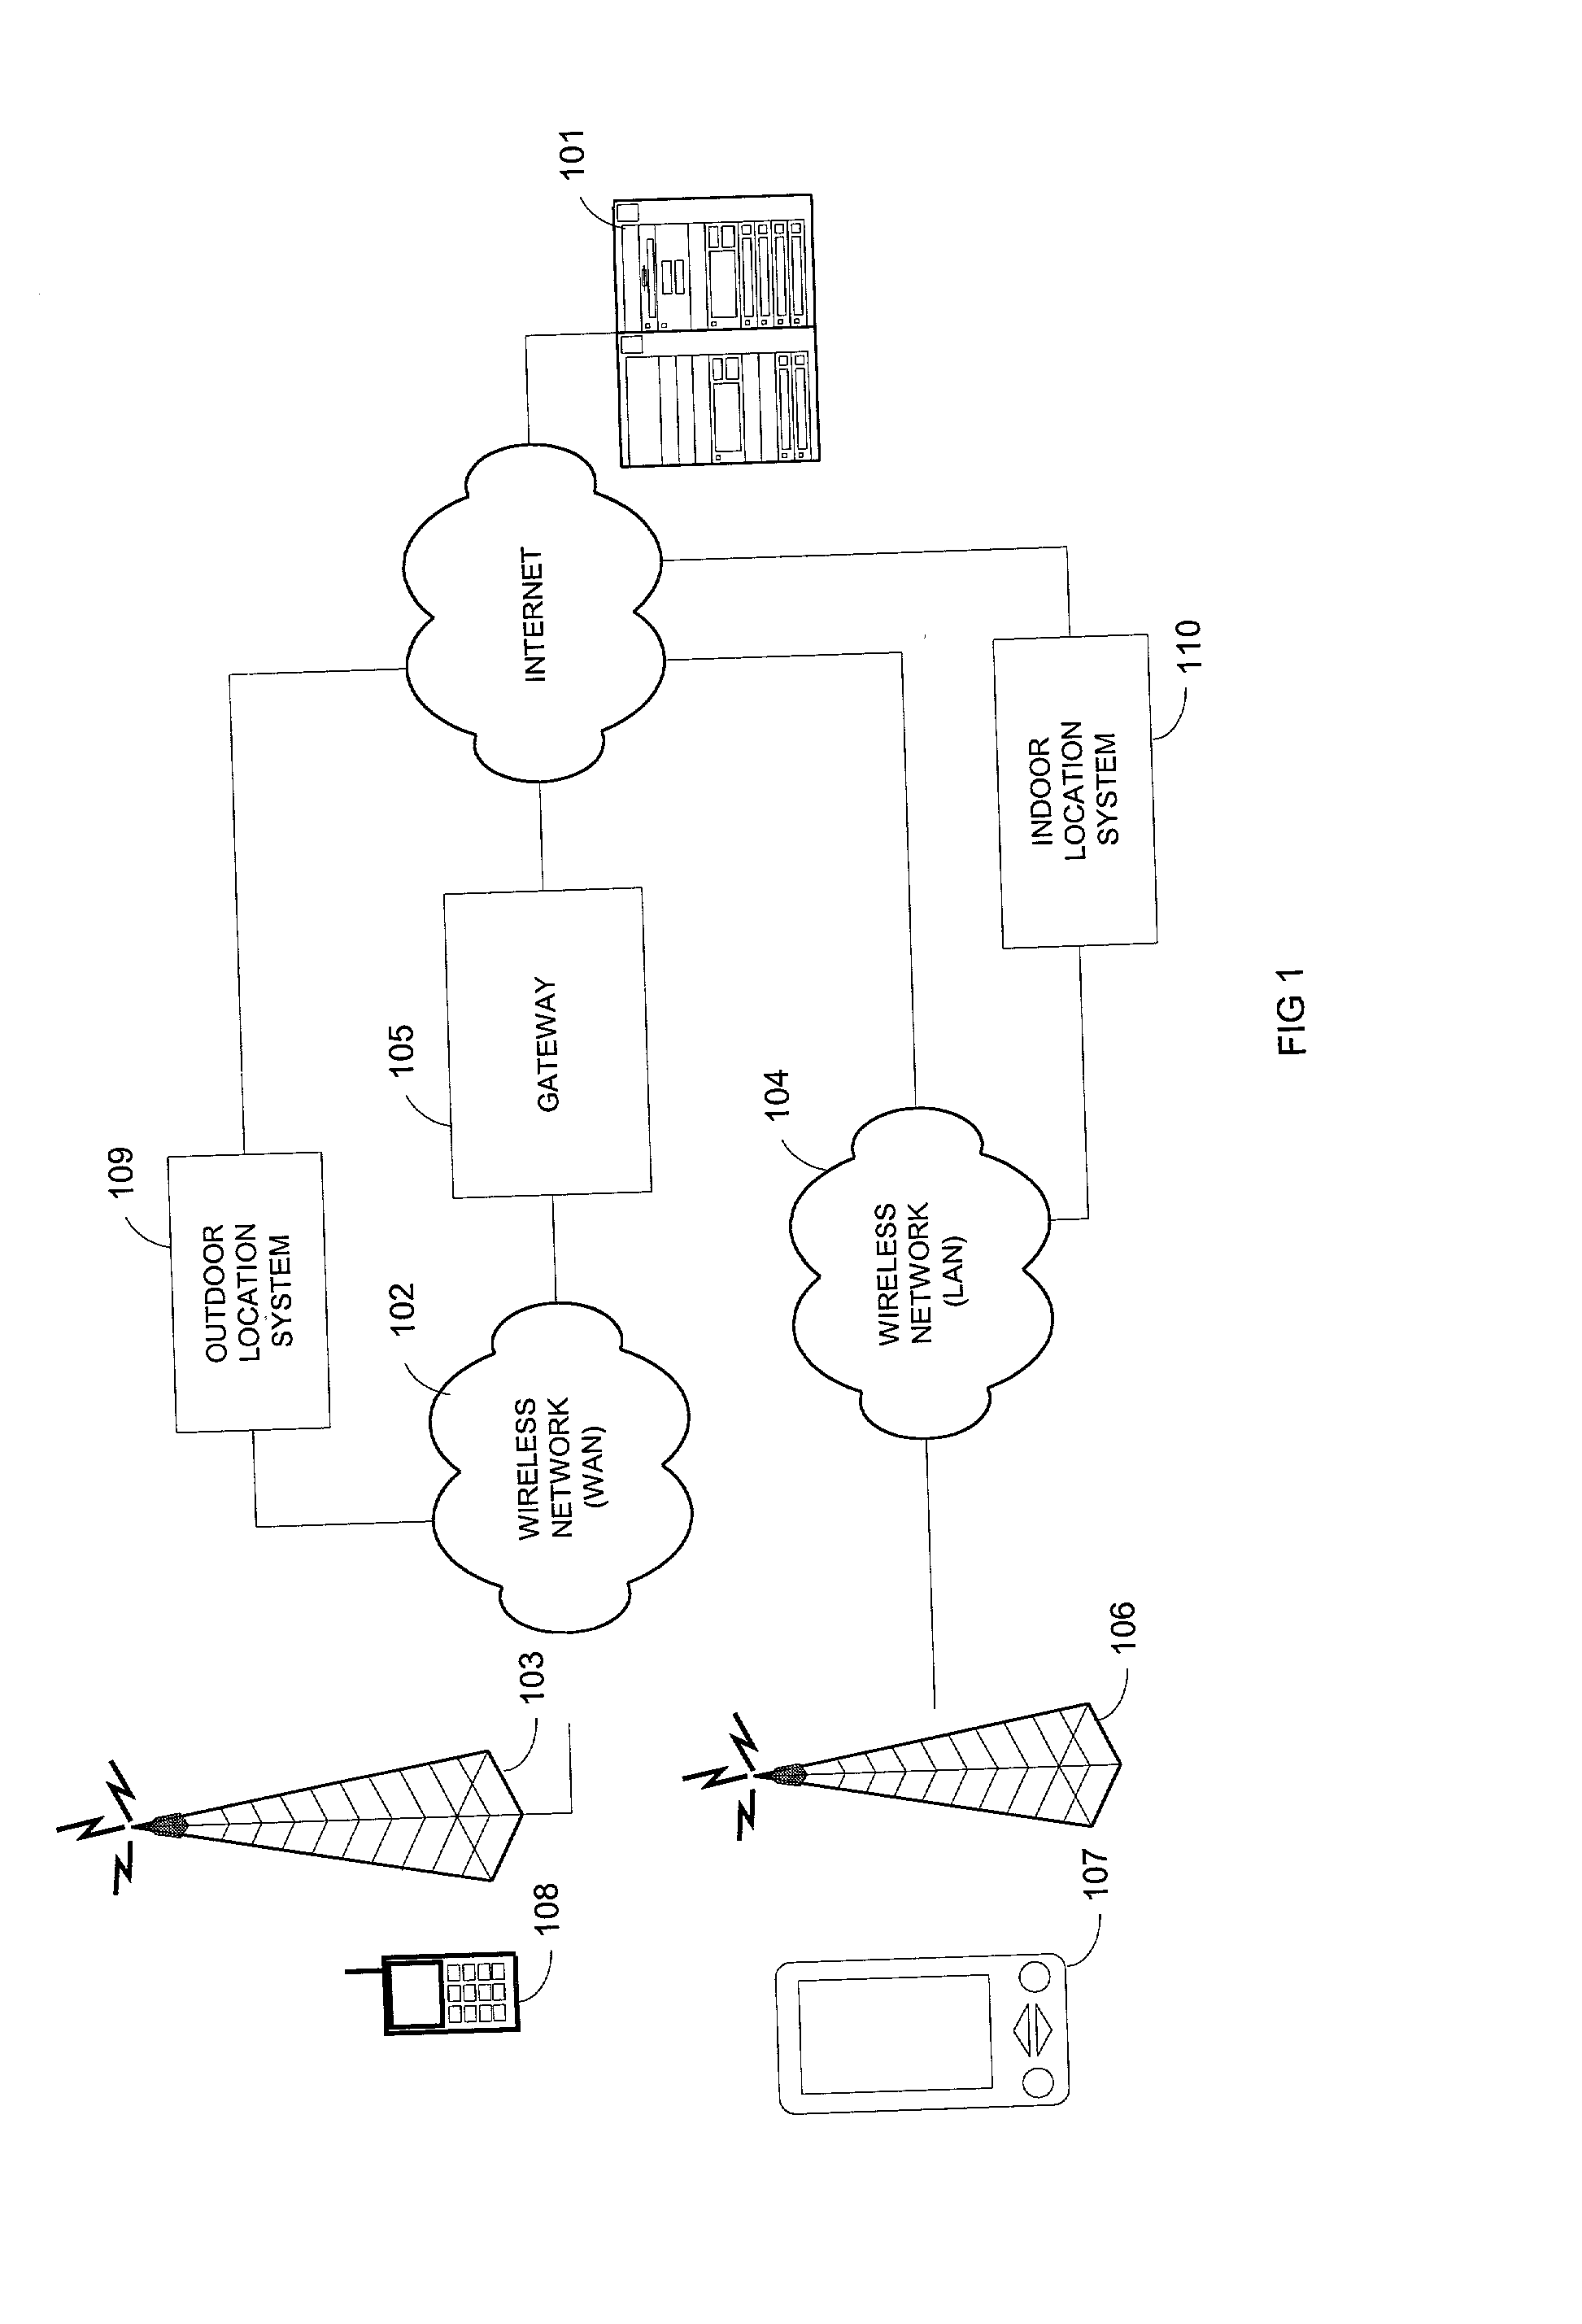 Location bookmark system and method for creating and using location information